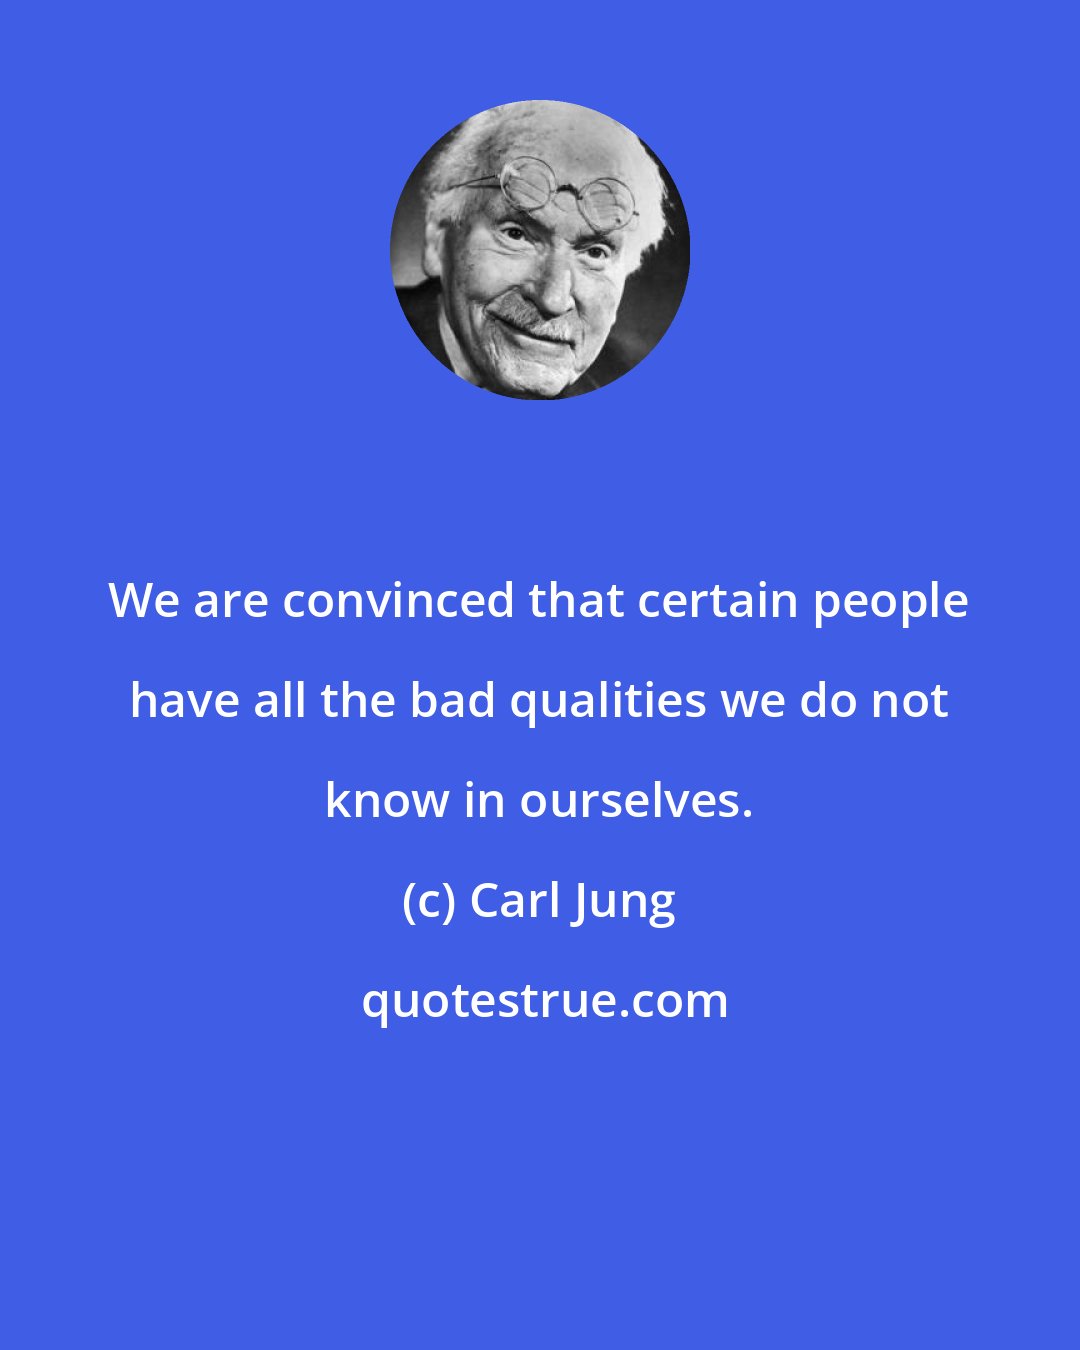 Carl Jung: We are convinced that certain people have all the bad qualities we do not know in ourselves.